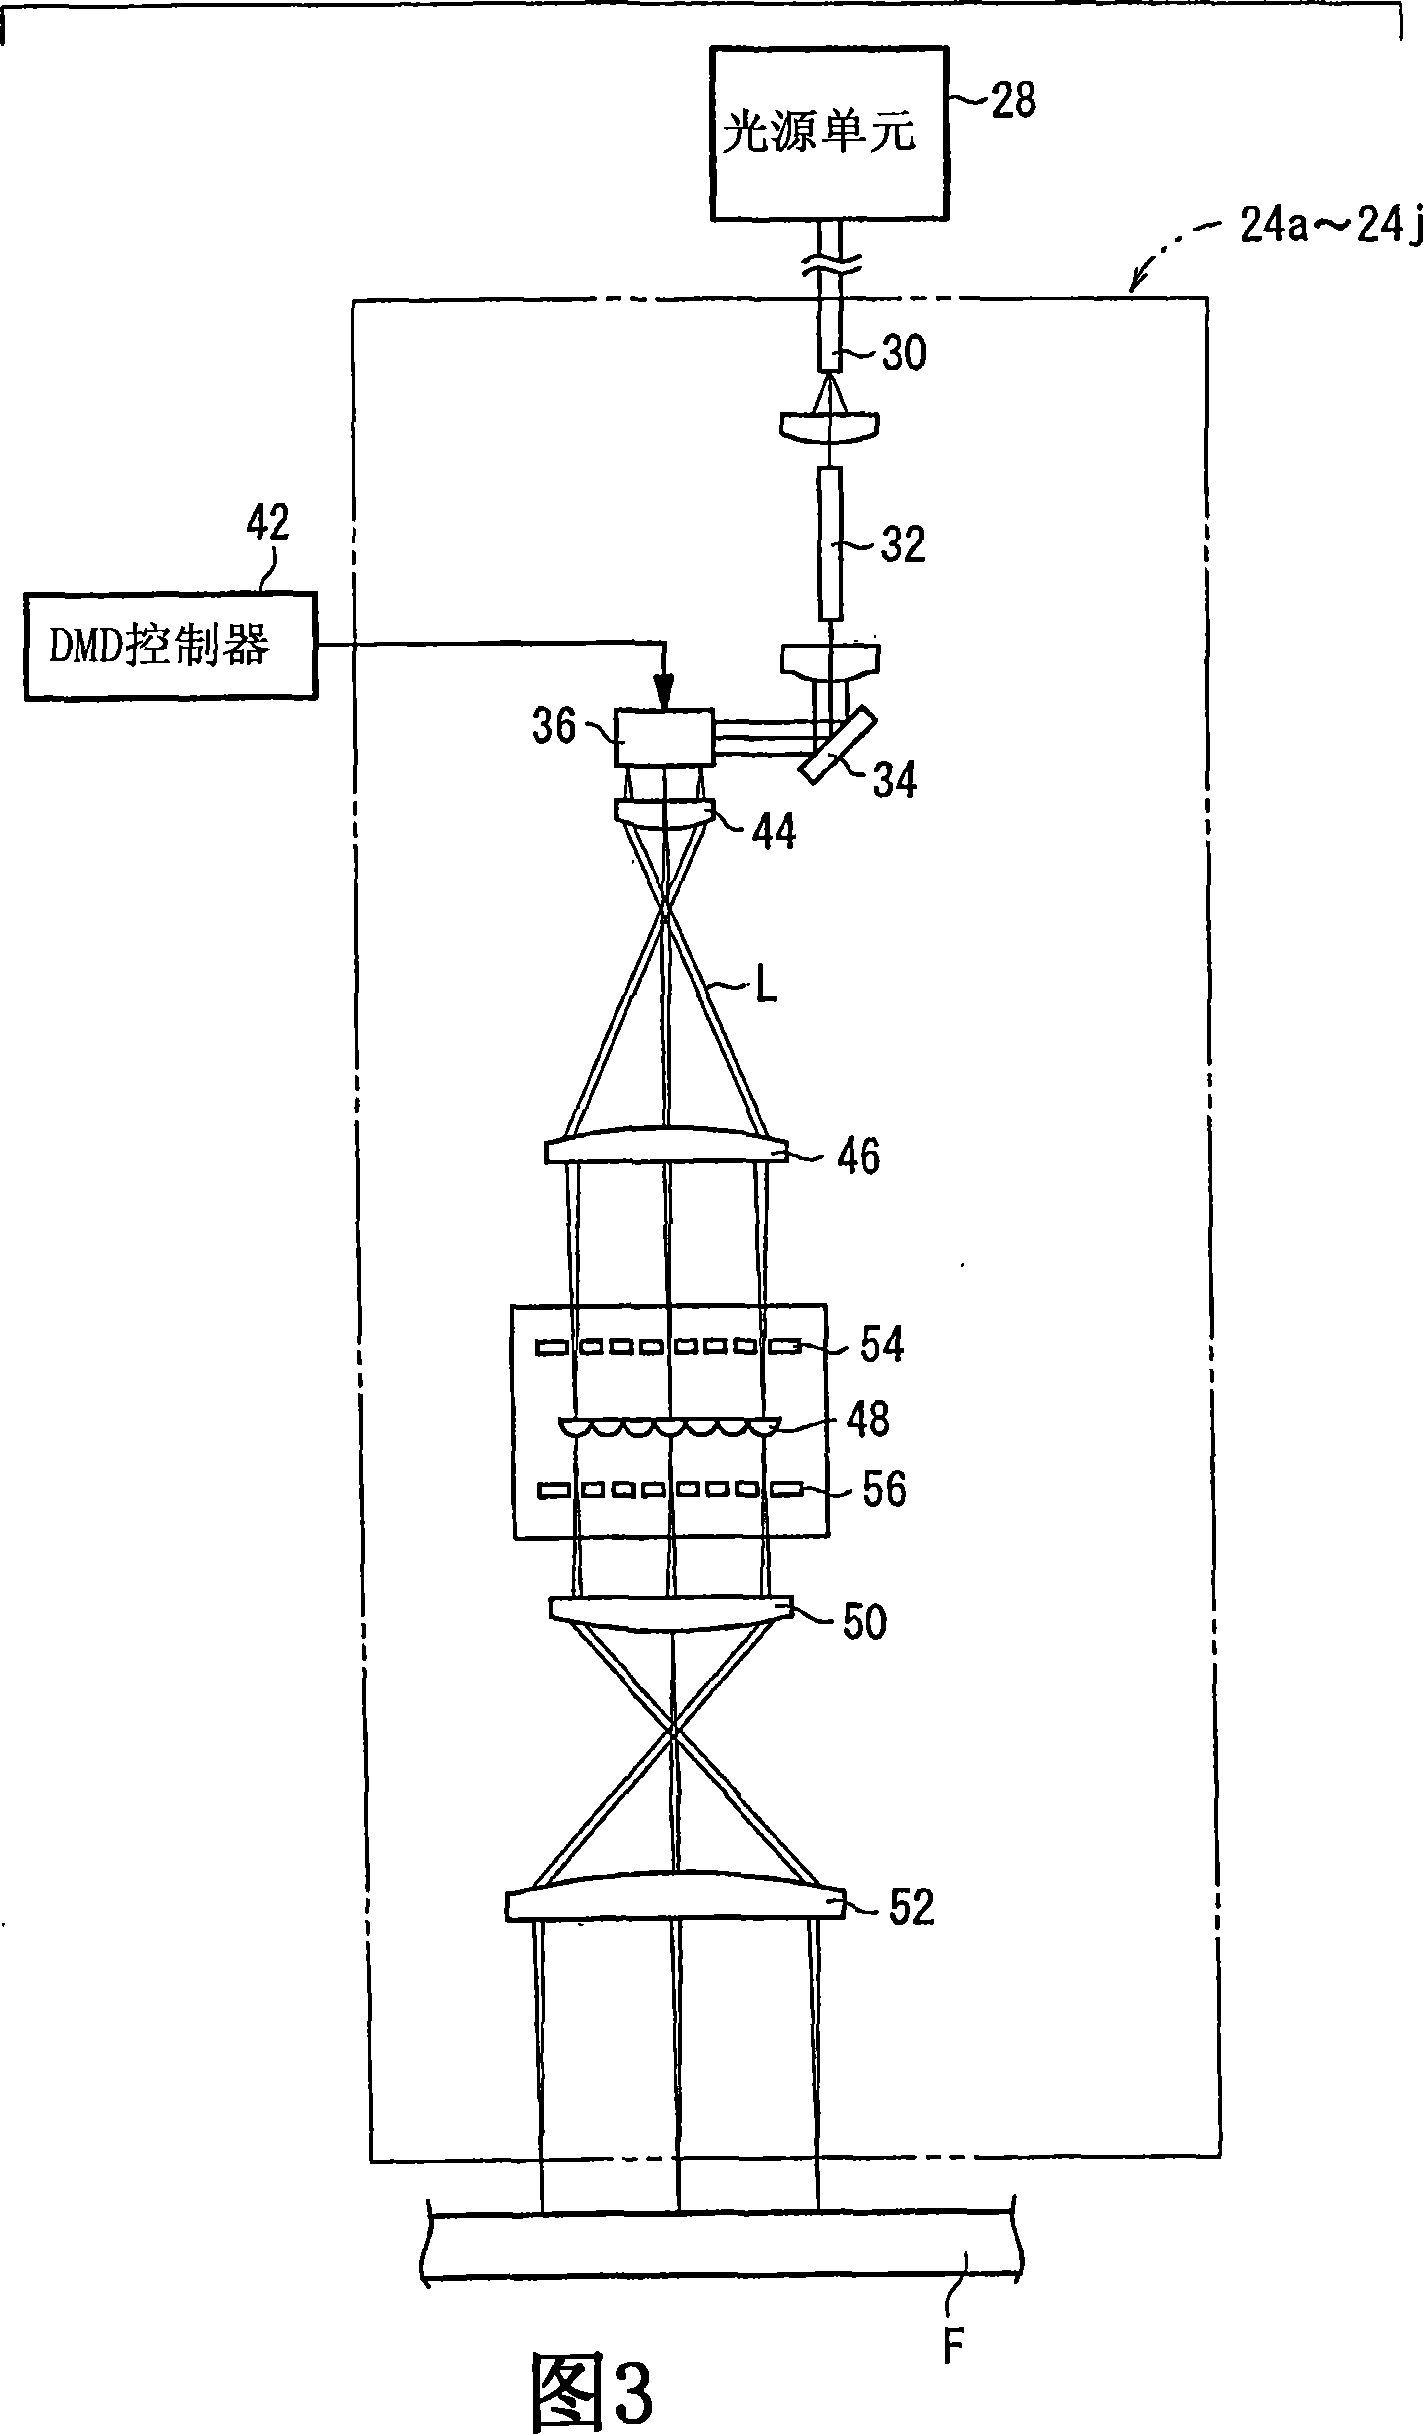 Drawing processing circuit, drawing apparatus using the same, and drawing method